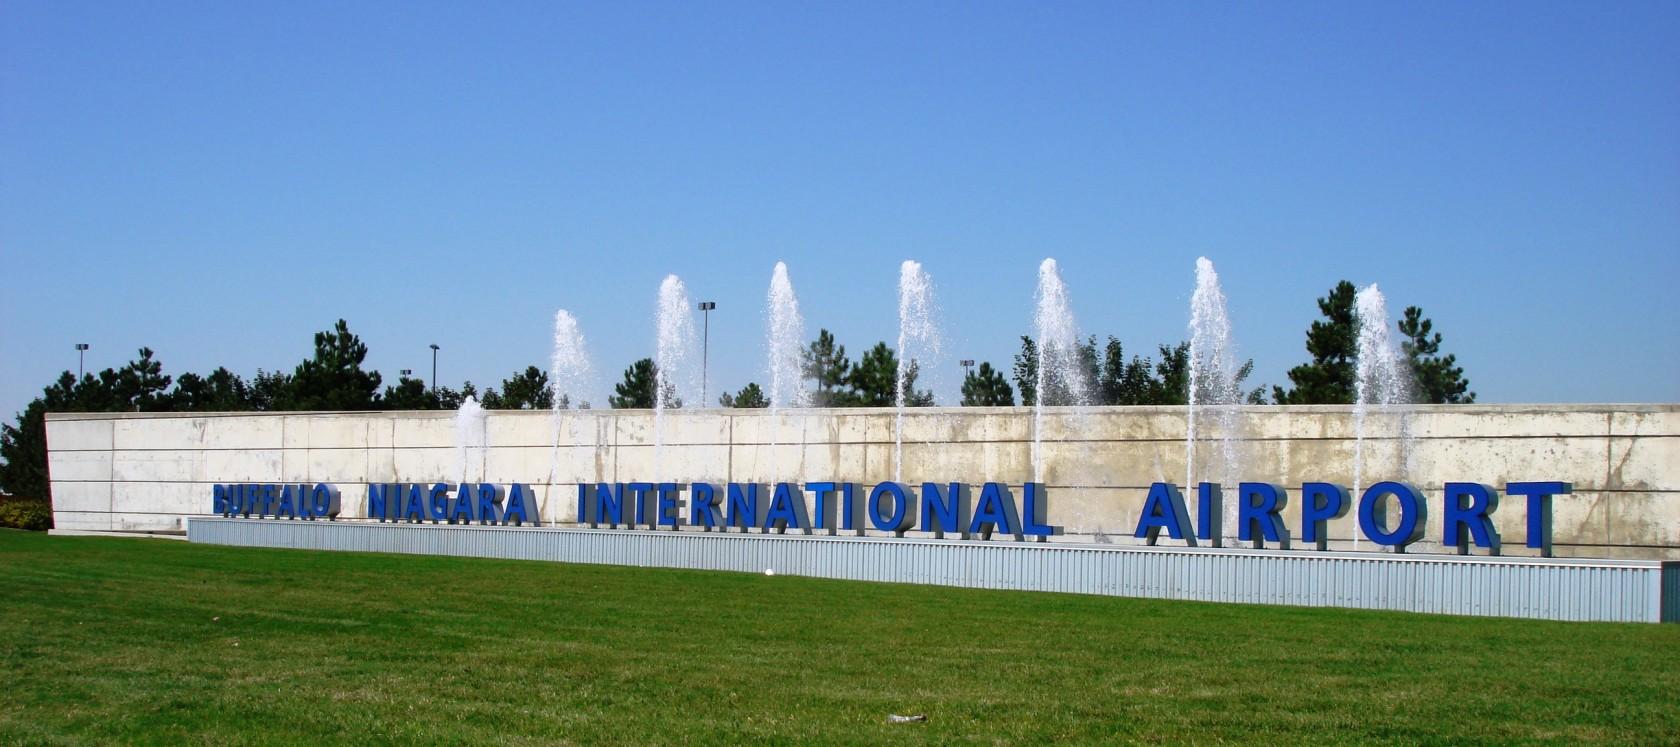 Does the Buffalo Niagara International Airport offer parking discounts and coupons?